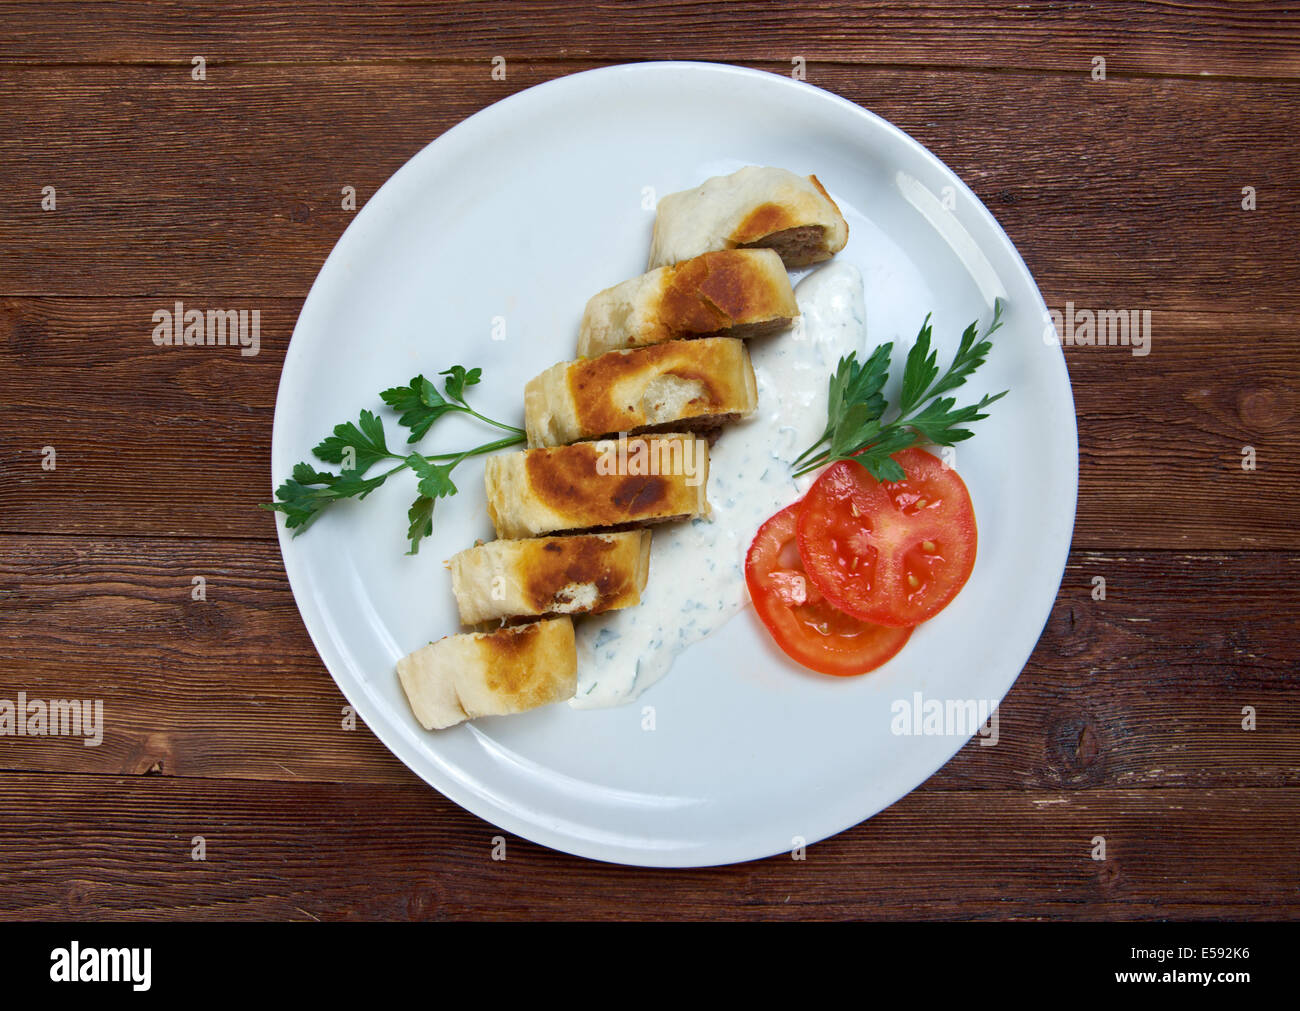 Turkish pide with beef meat and sauces Stock Photo